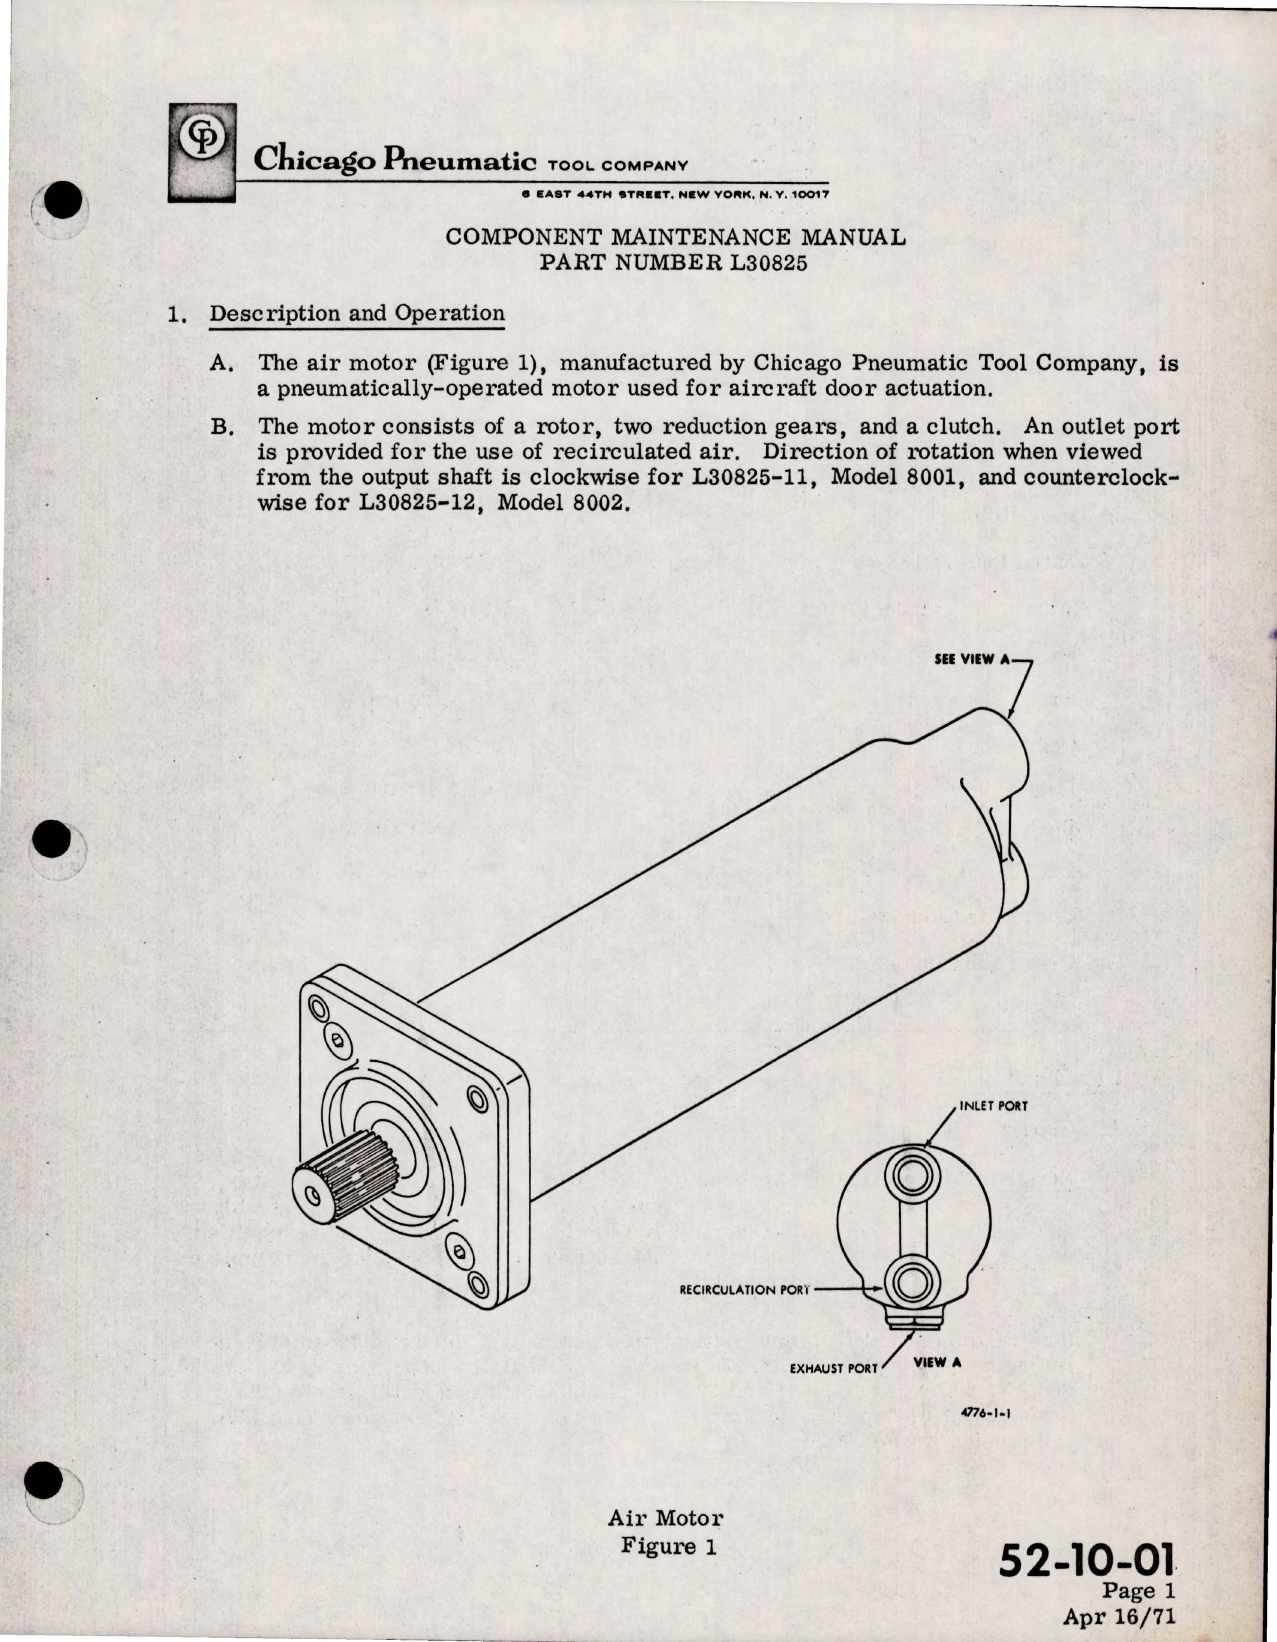 Sample page 7 from AirCorps Library document: Maintenance Manual for Air Motor - Parts L30825-11 and L30825-12